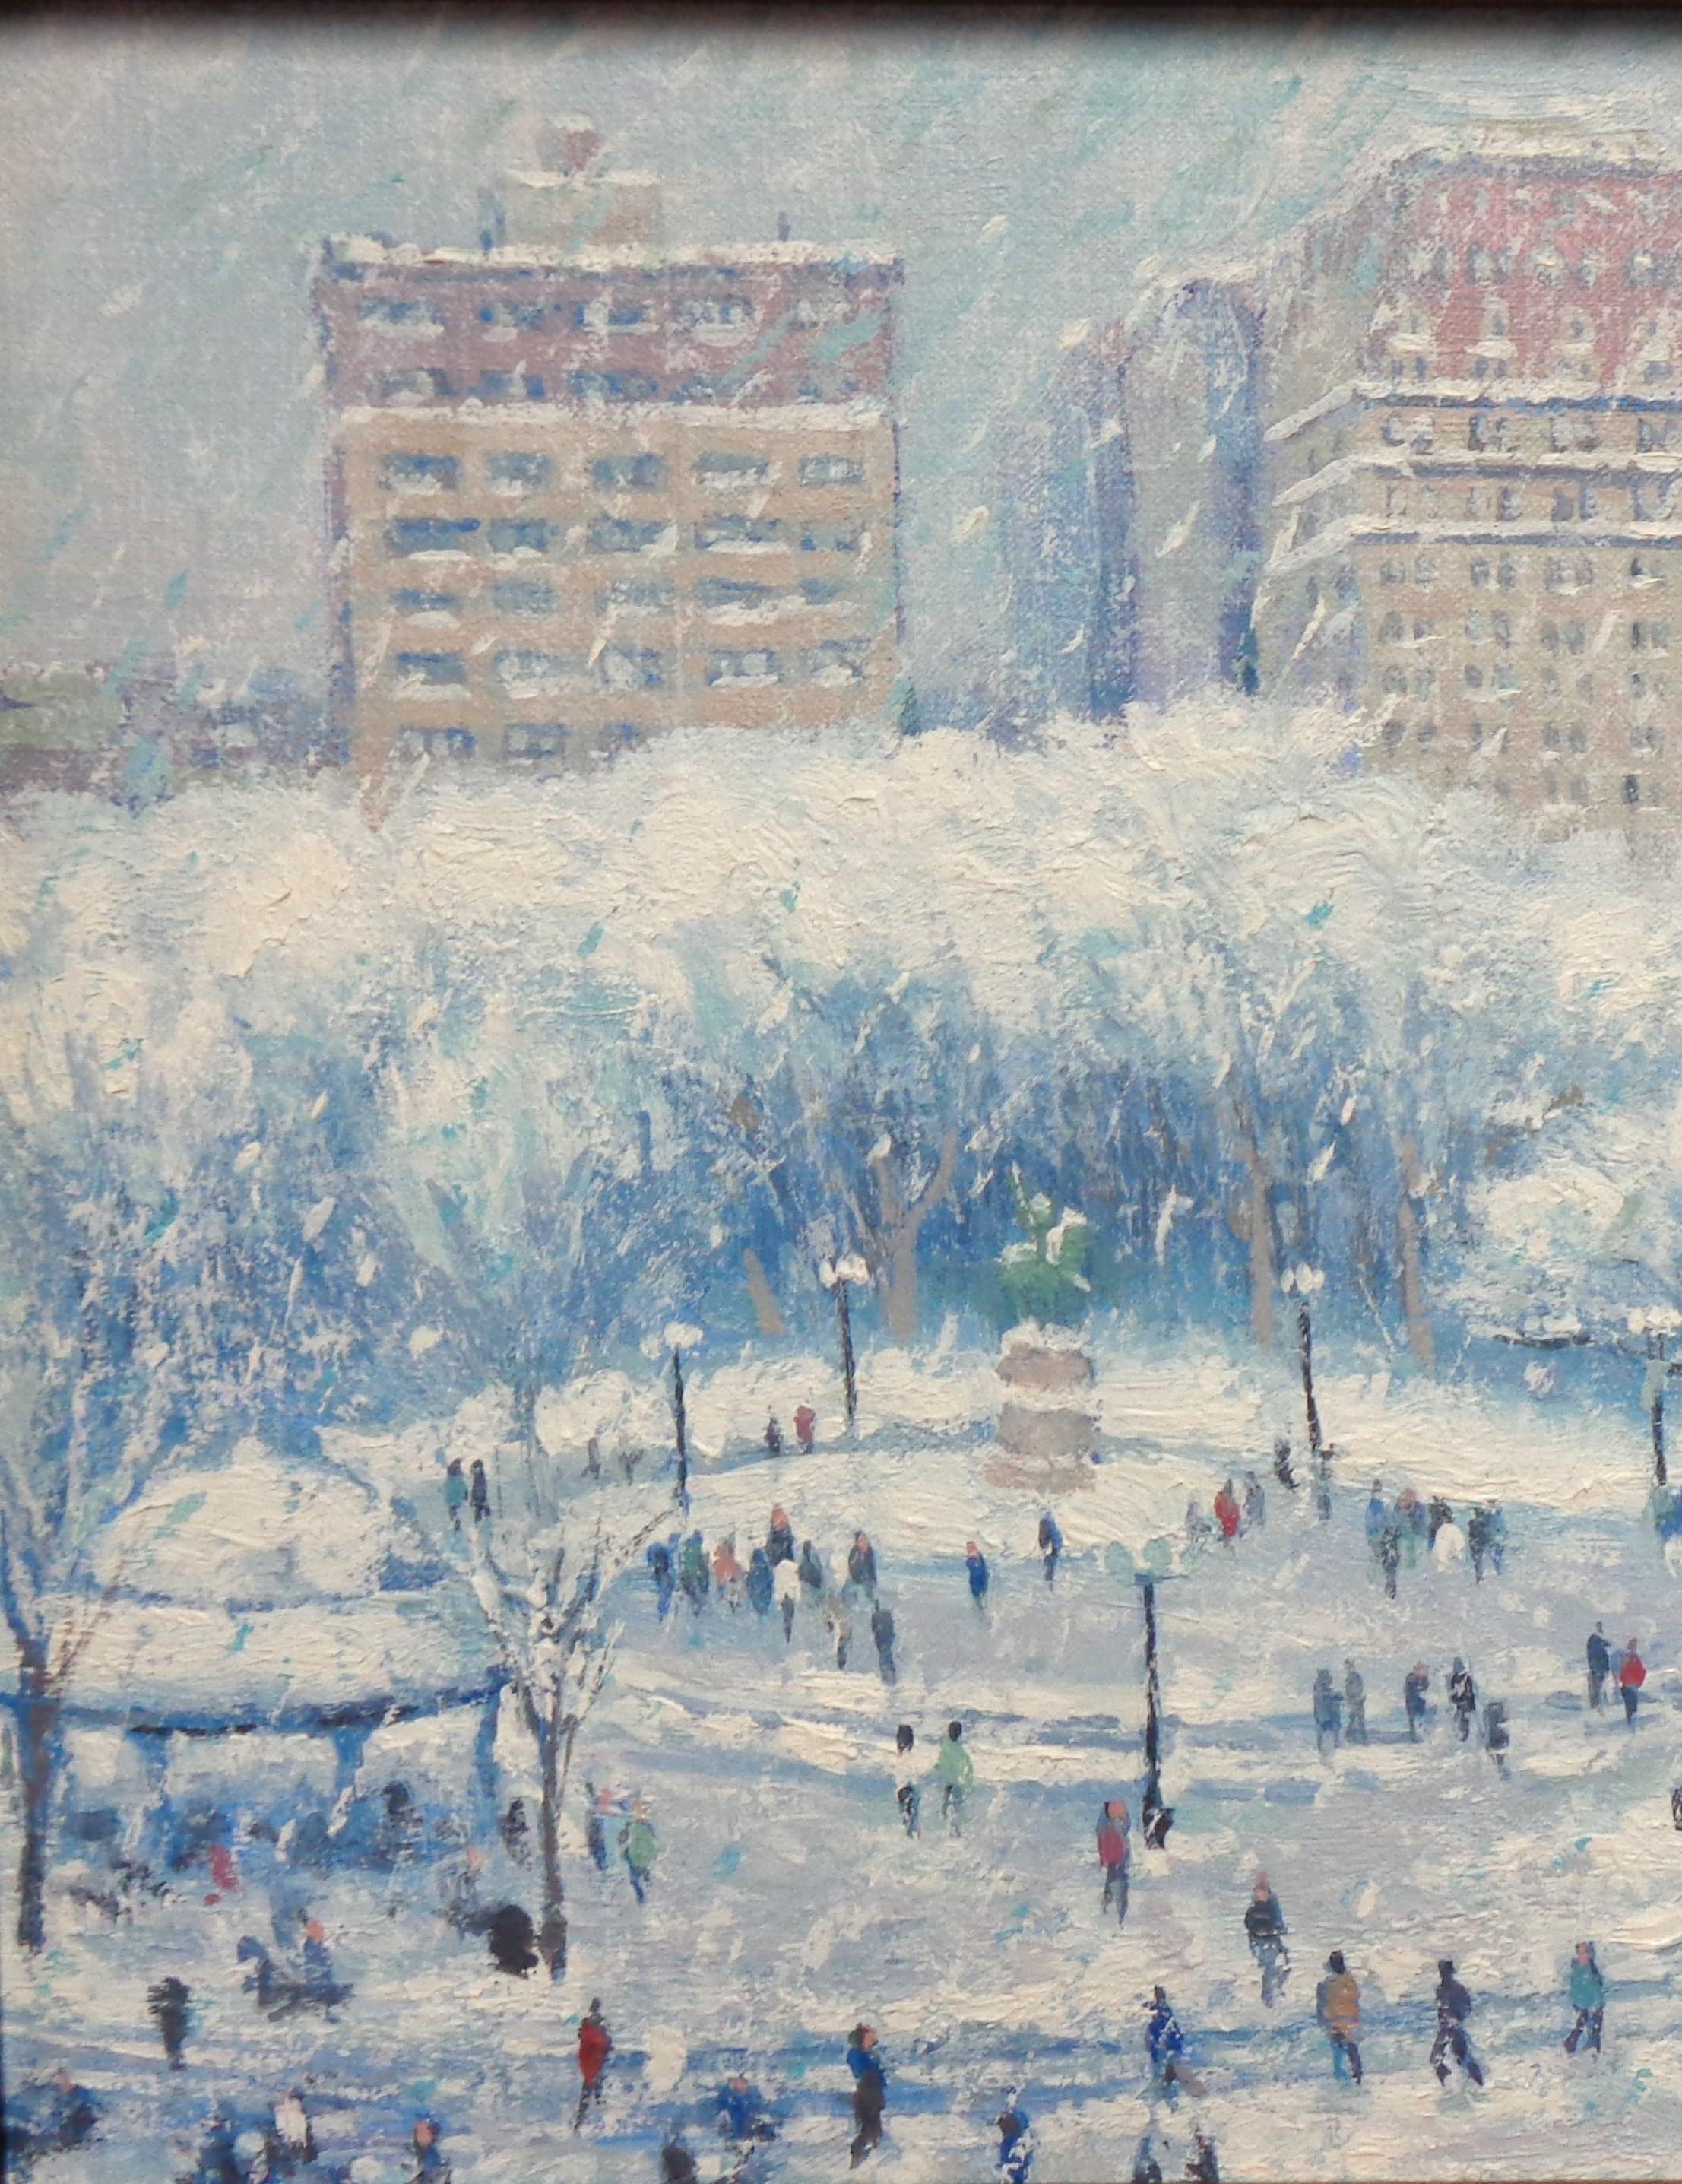  New York City Snow Oil Painting Michael Budden Winter Union Square For Sale 2